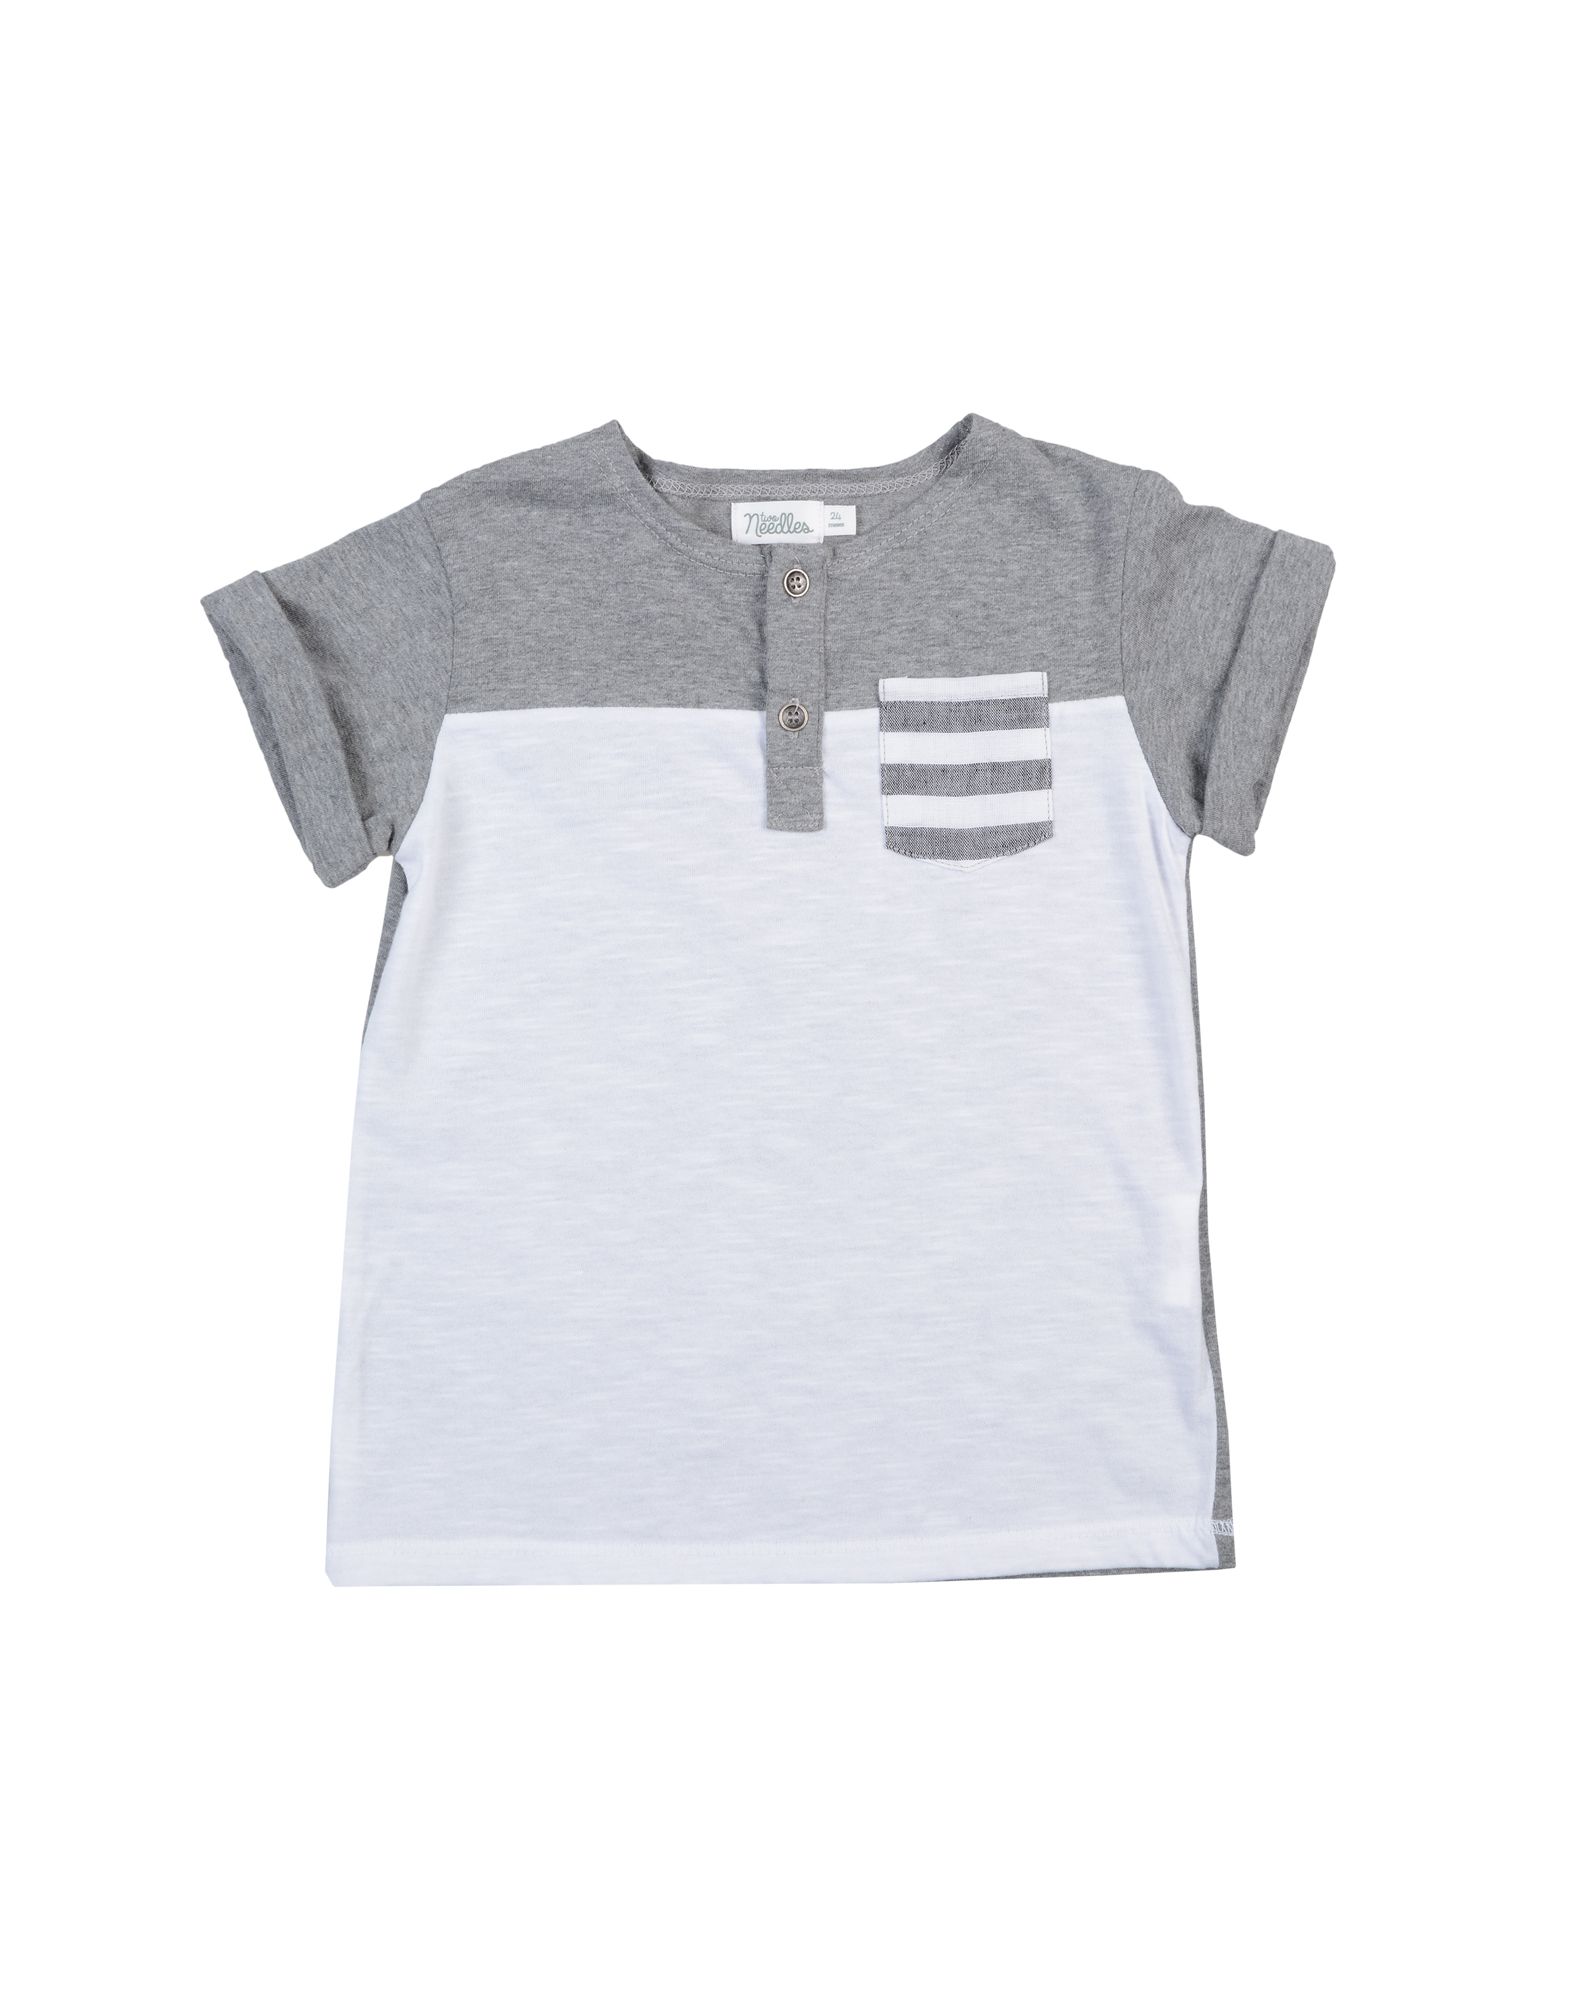 Two Needles Kids' T-shirts In Grey